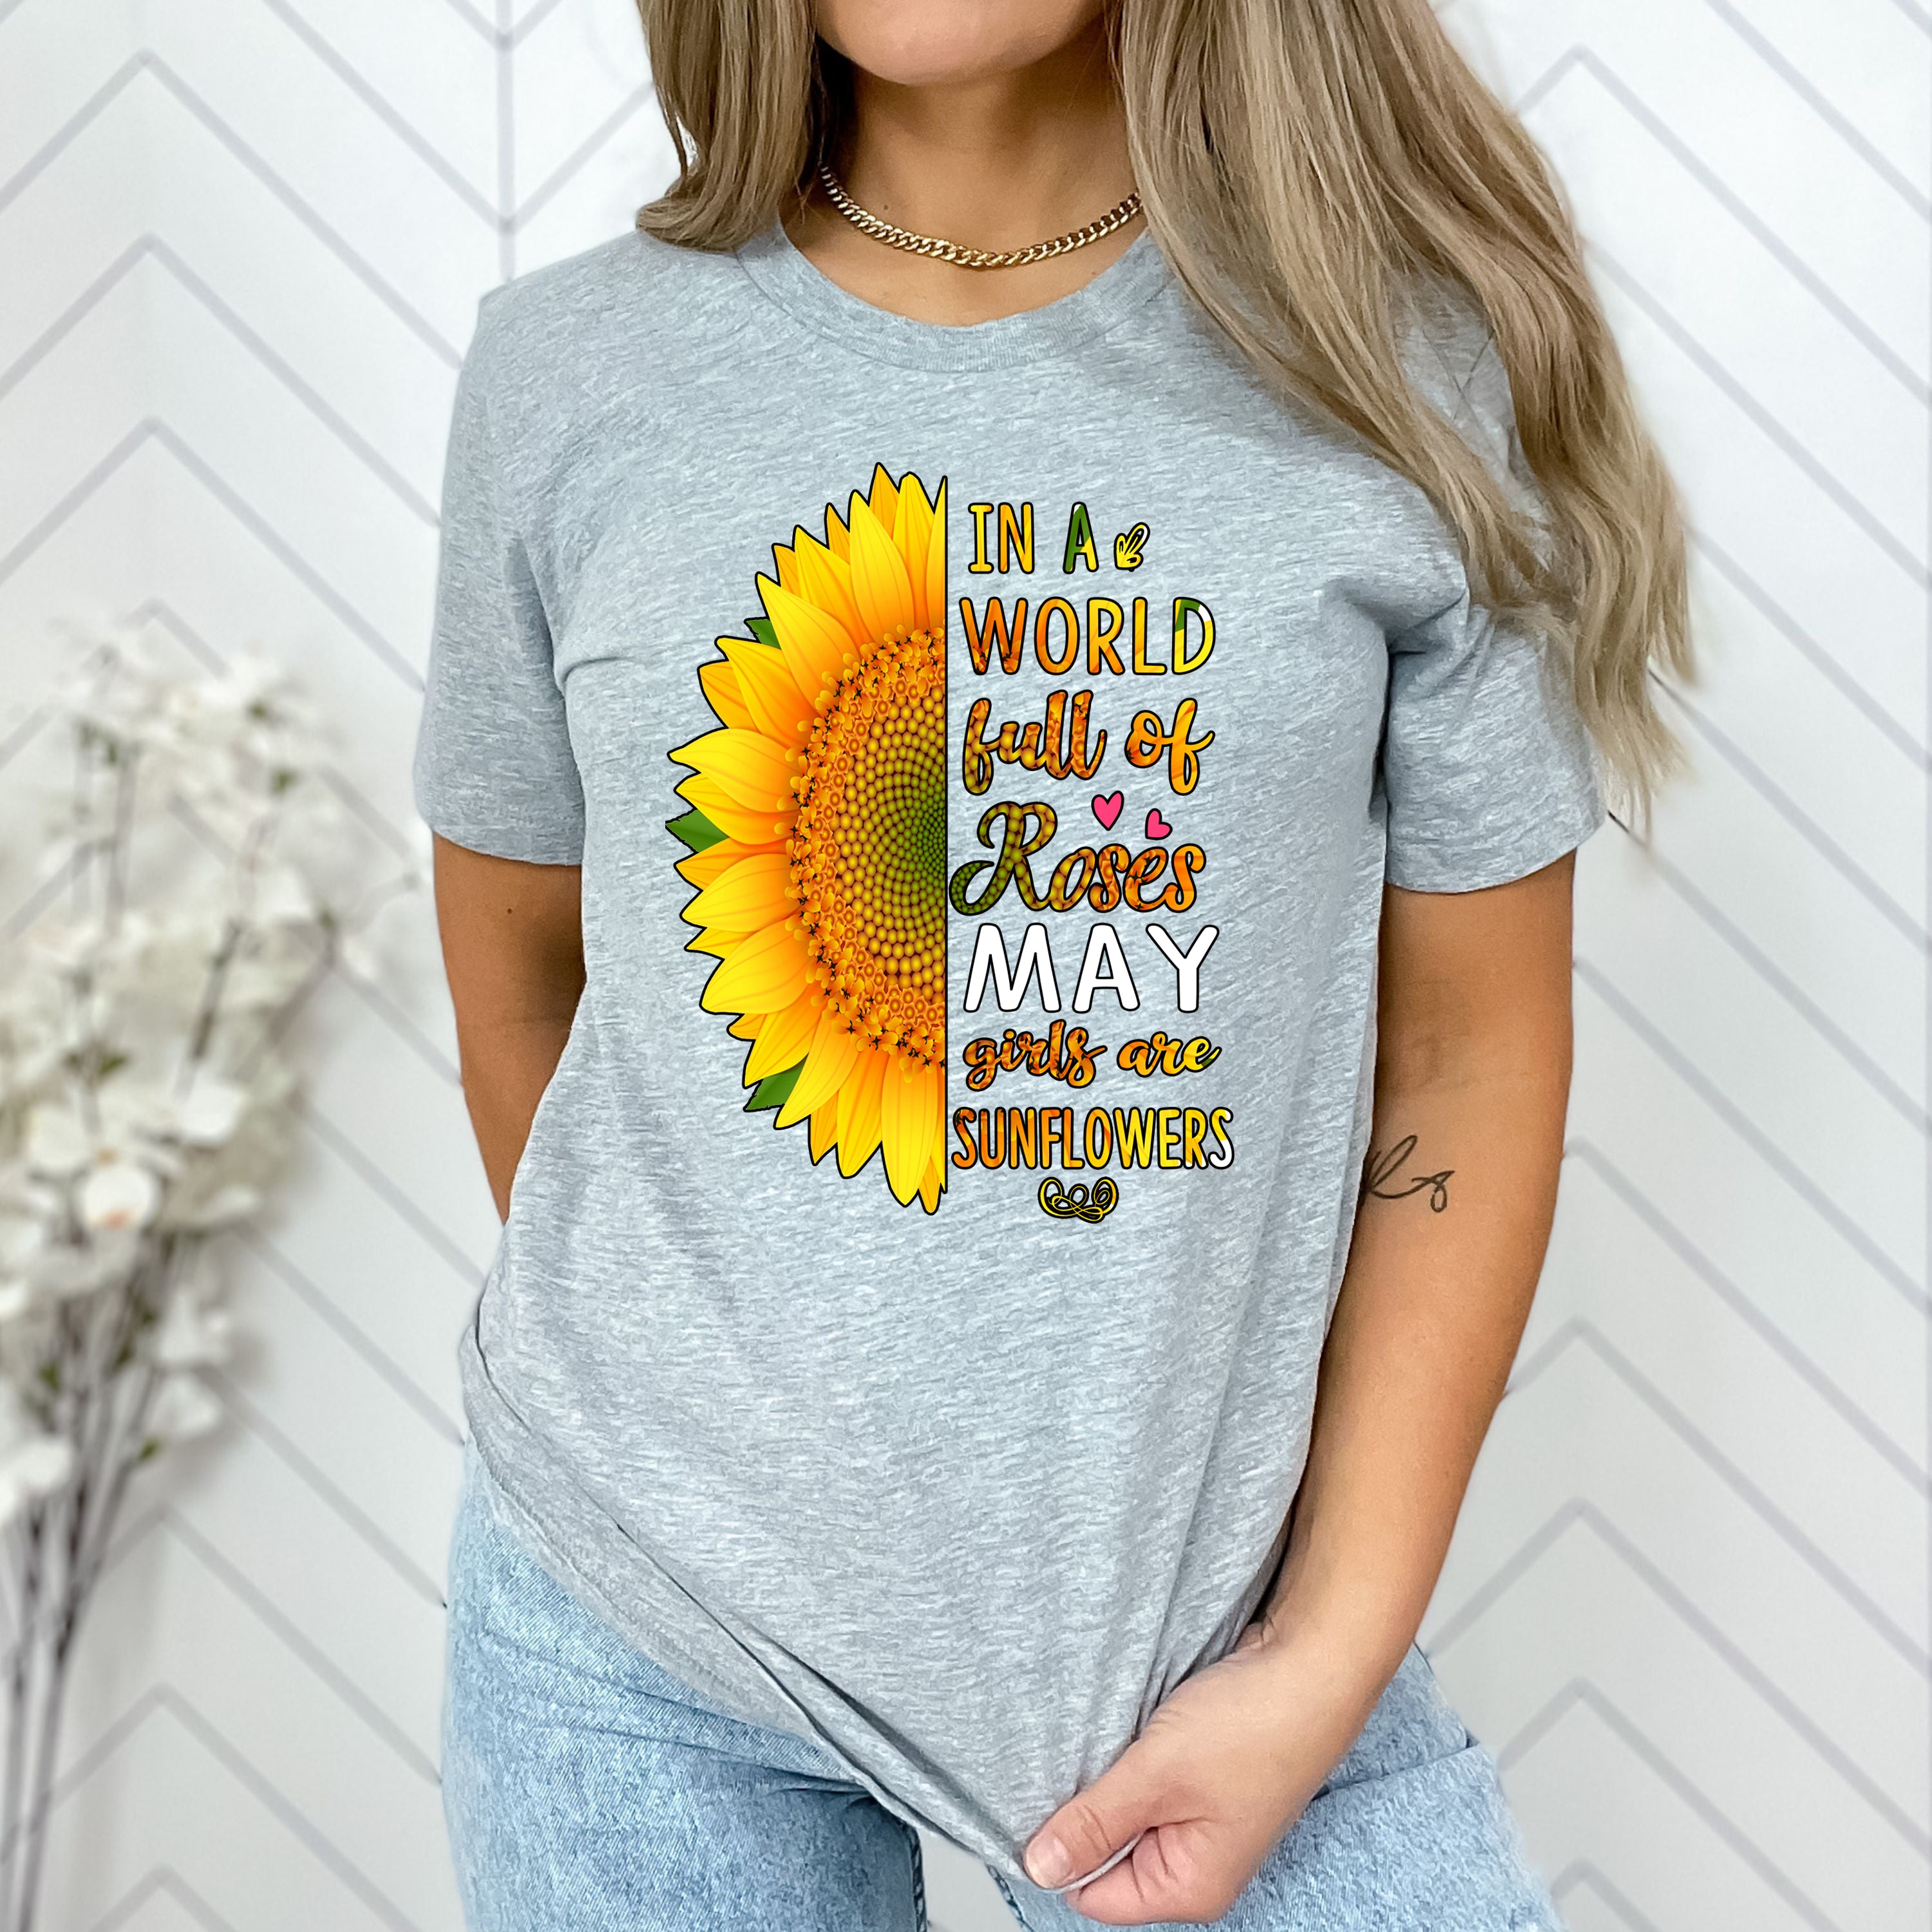 "In A World Full Of Roses May Girls are Sunflowers"